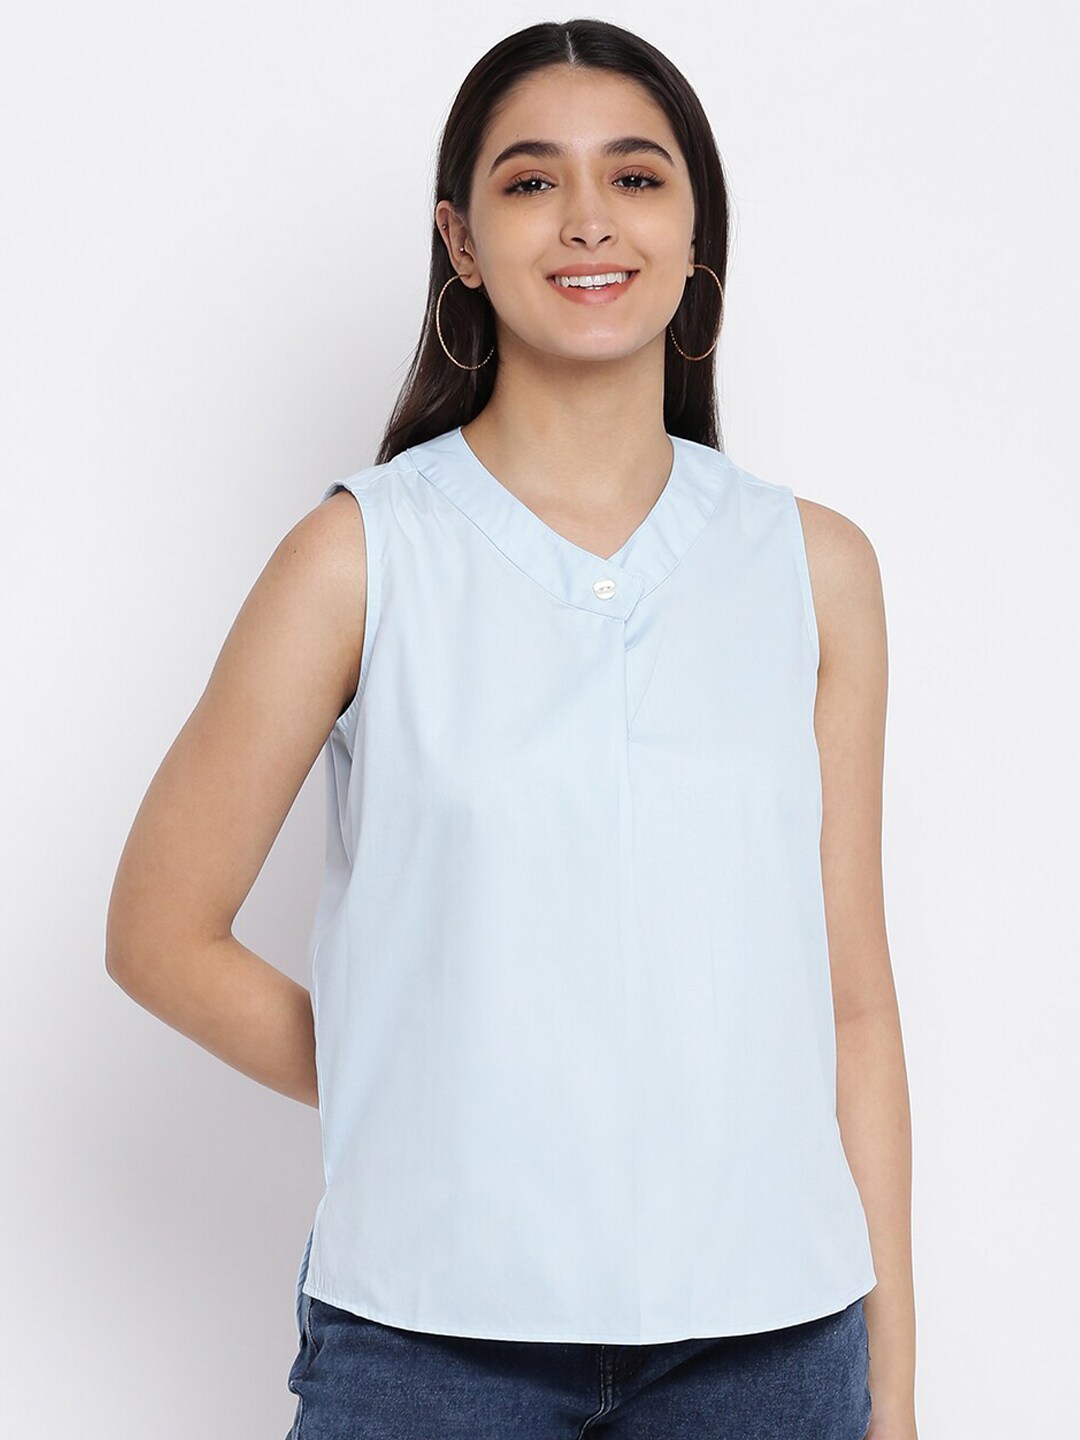 abof Women Blue Solid Polyester V-Neck Regular Top Price in India